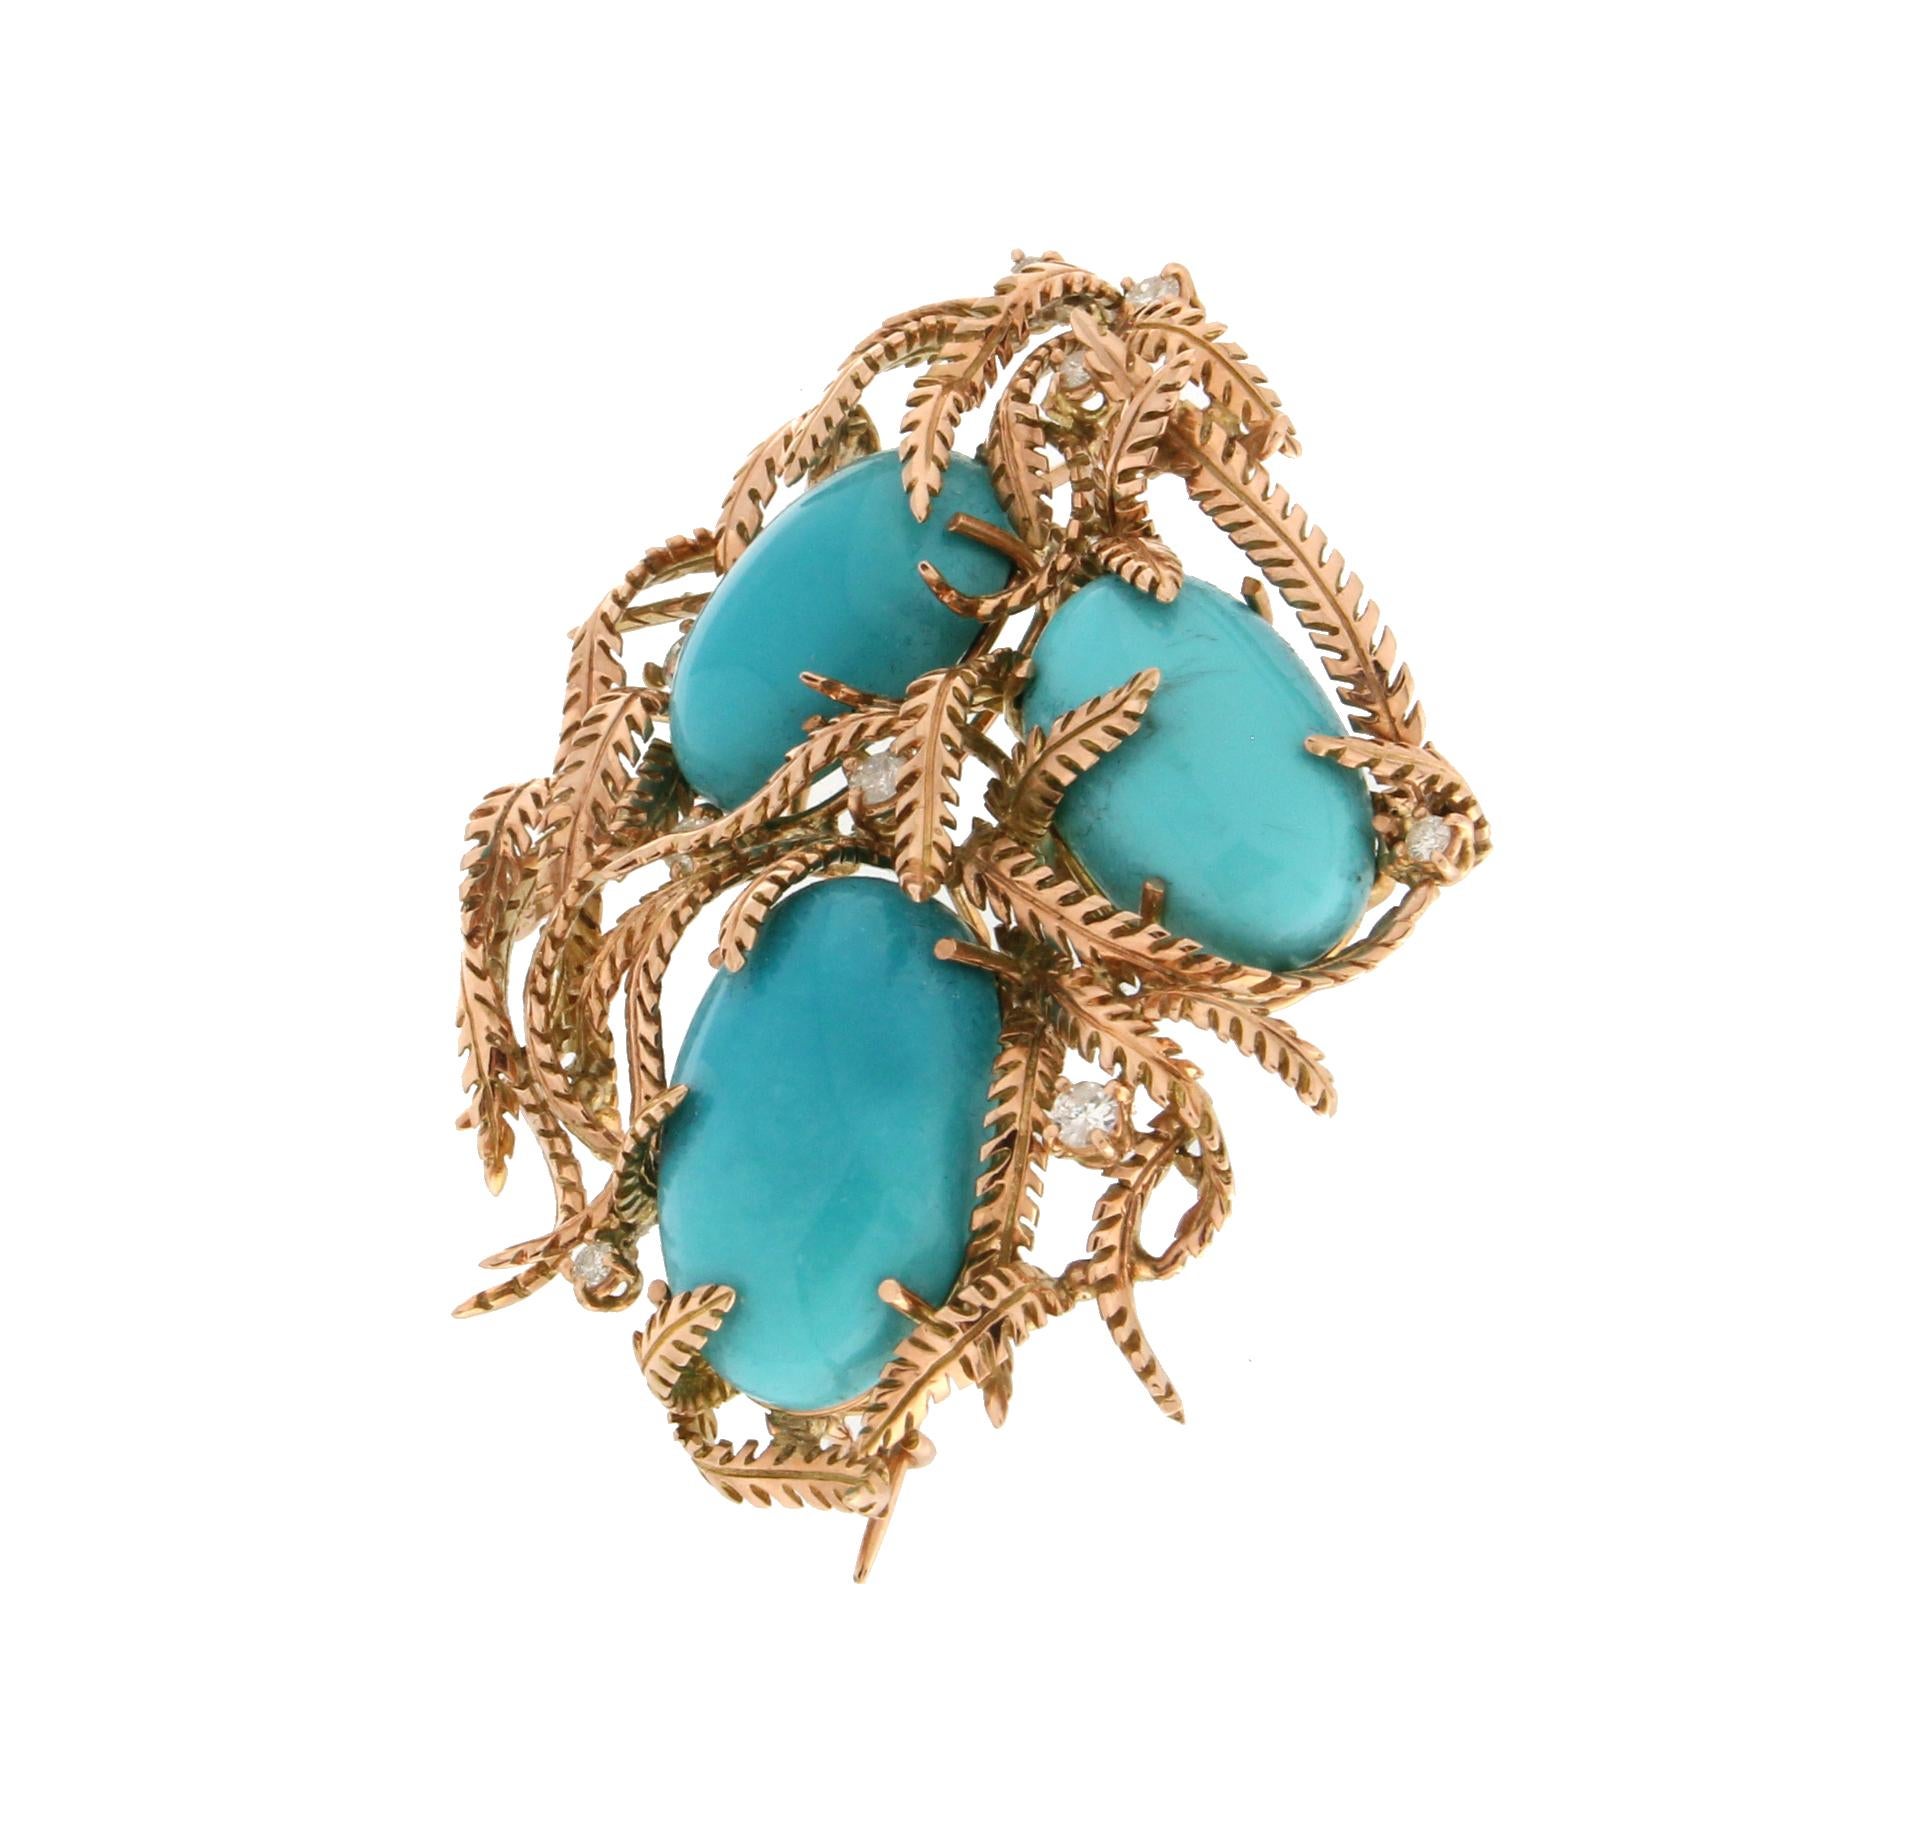 Brilliant Cut Handcraft Turquoise 14 Karat Yellow Gold Diamonds Pendant Necklace and Brooch For Sale